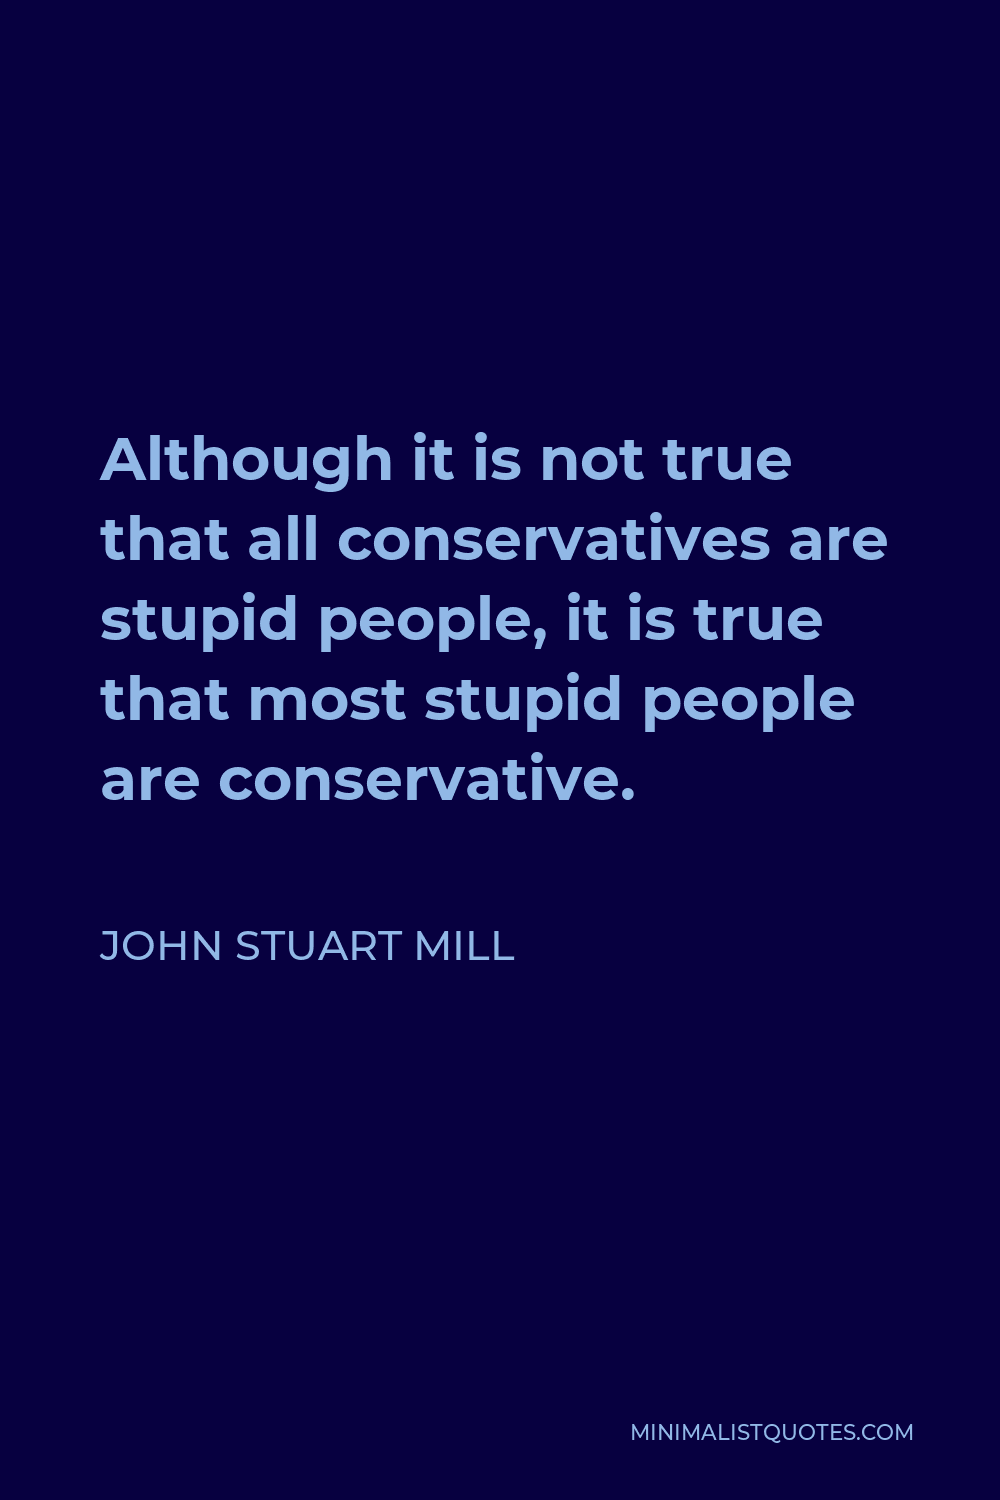 John Stuart Mill Quote - Although it is not true that all conservatives are stupid people, it is true that most stupid people are conservative.